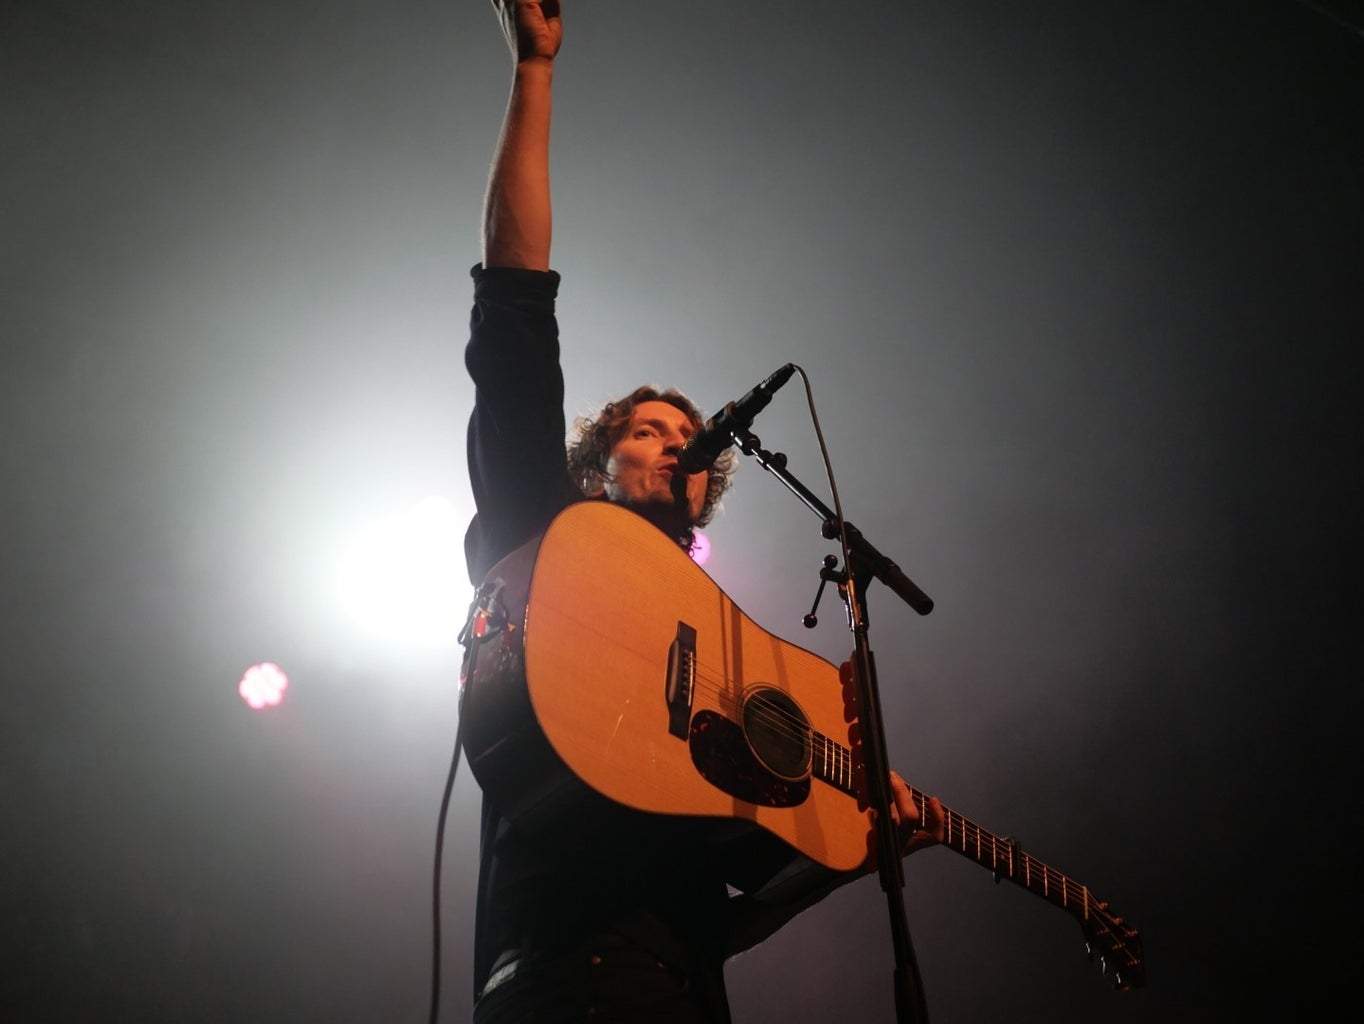 Man holding guitar with arm in the air at mic stand